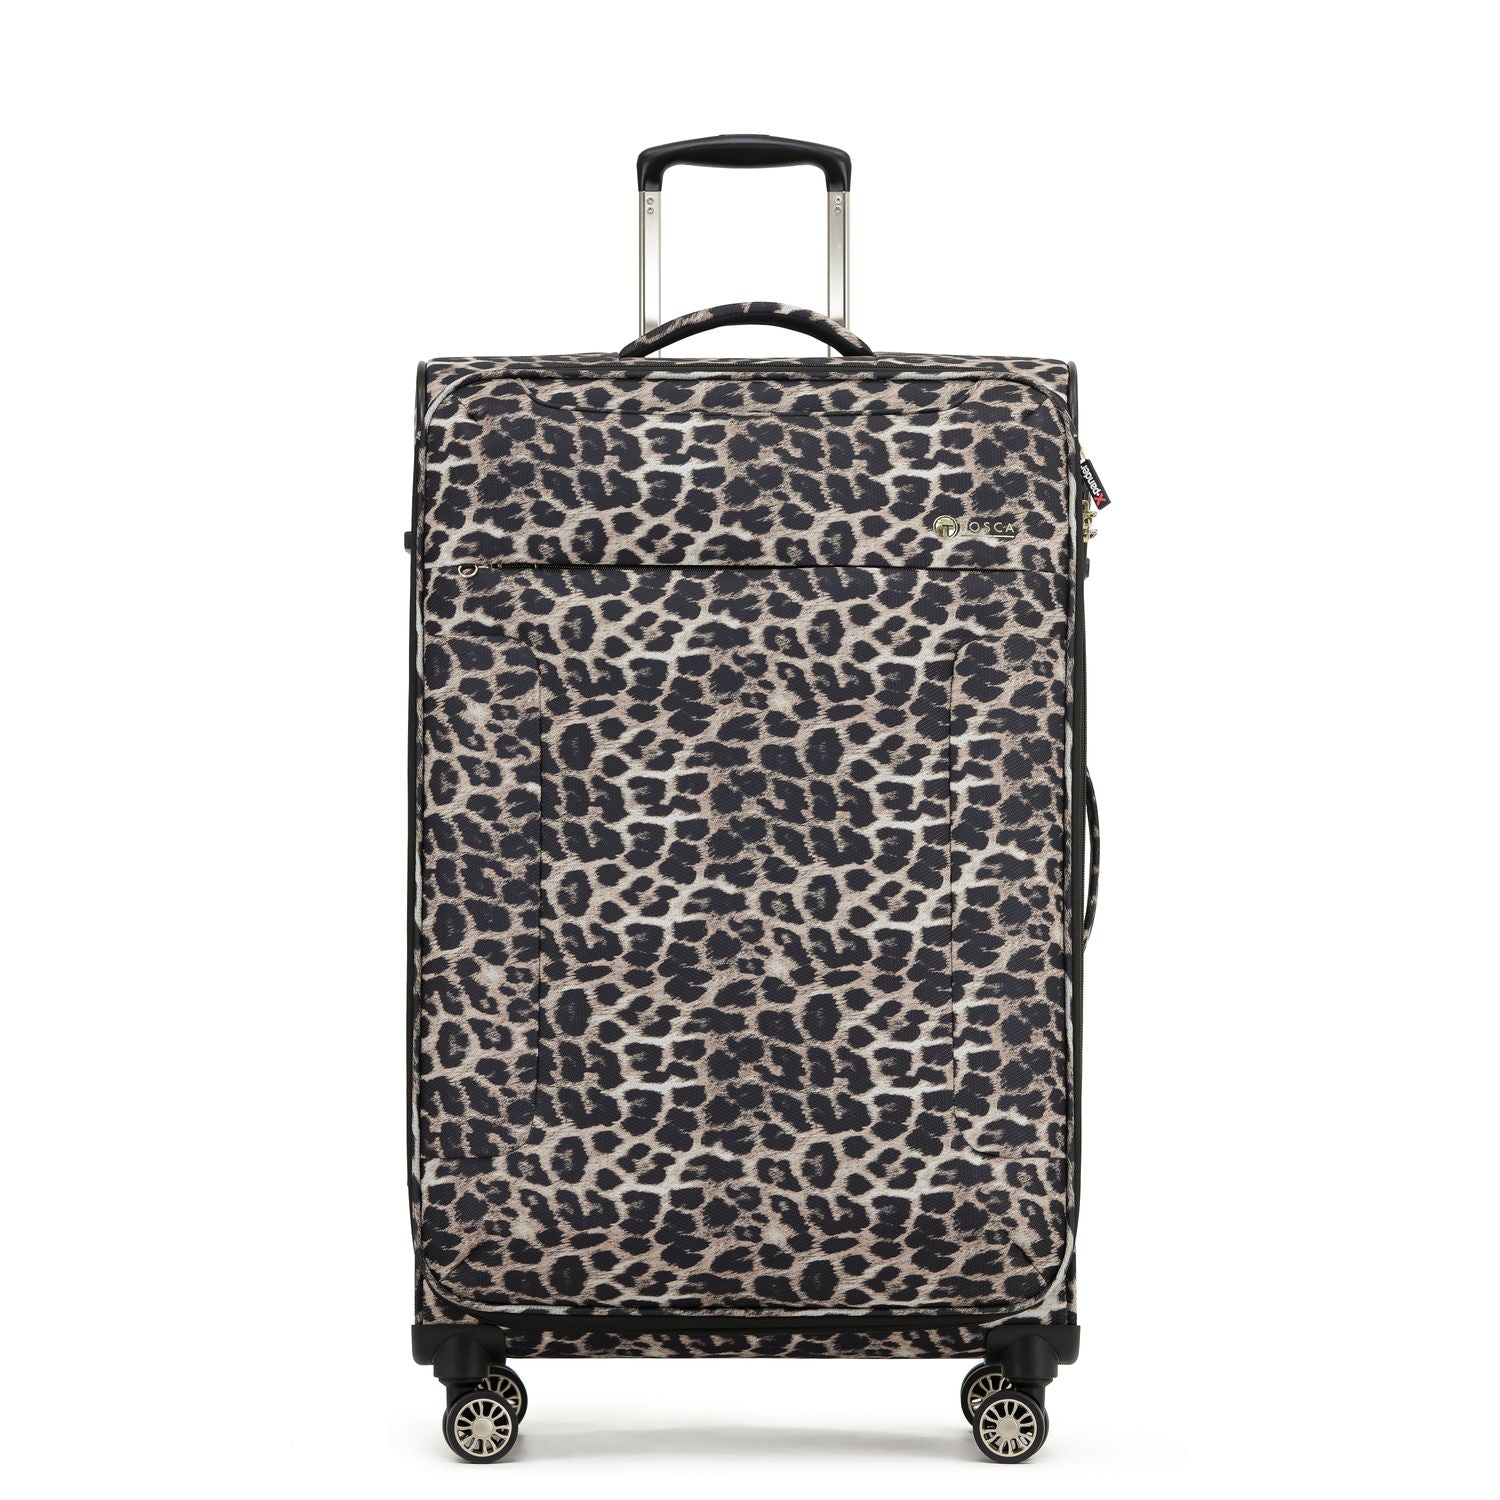 Tosca - So Lite 3.0 29in Large 4 Wheel Soft Suitcase - Leopard